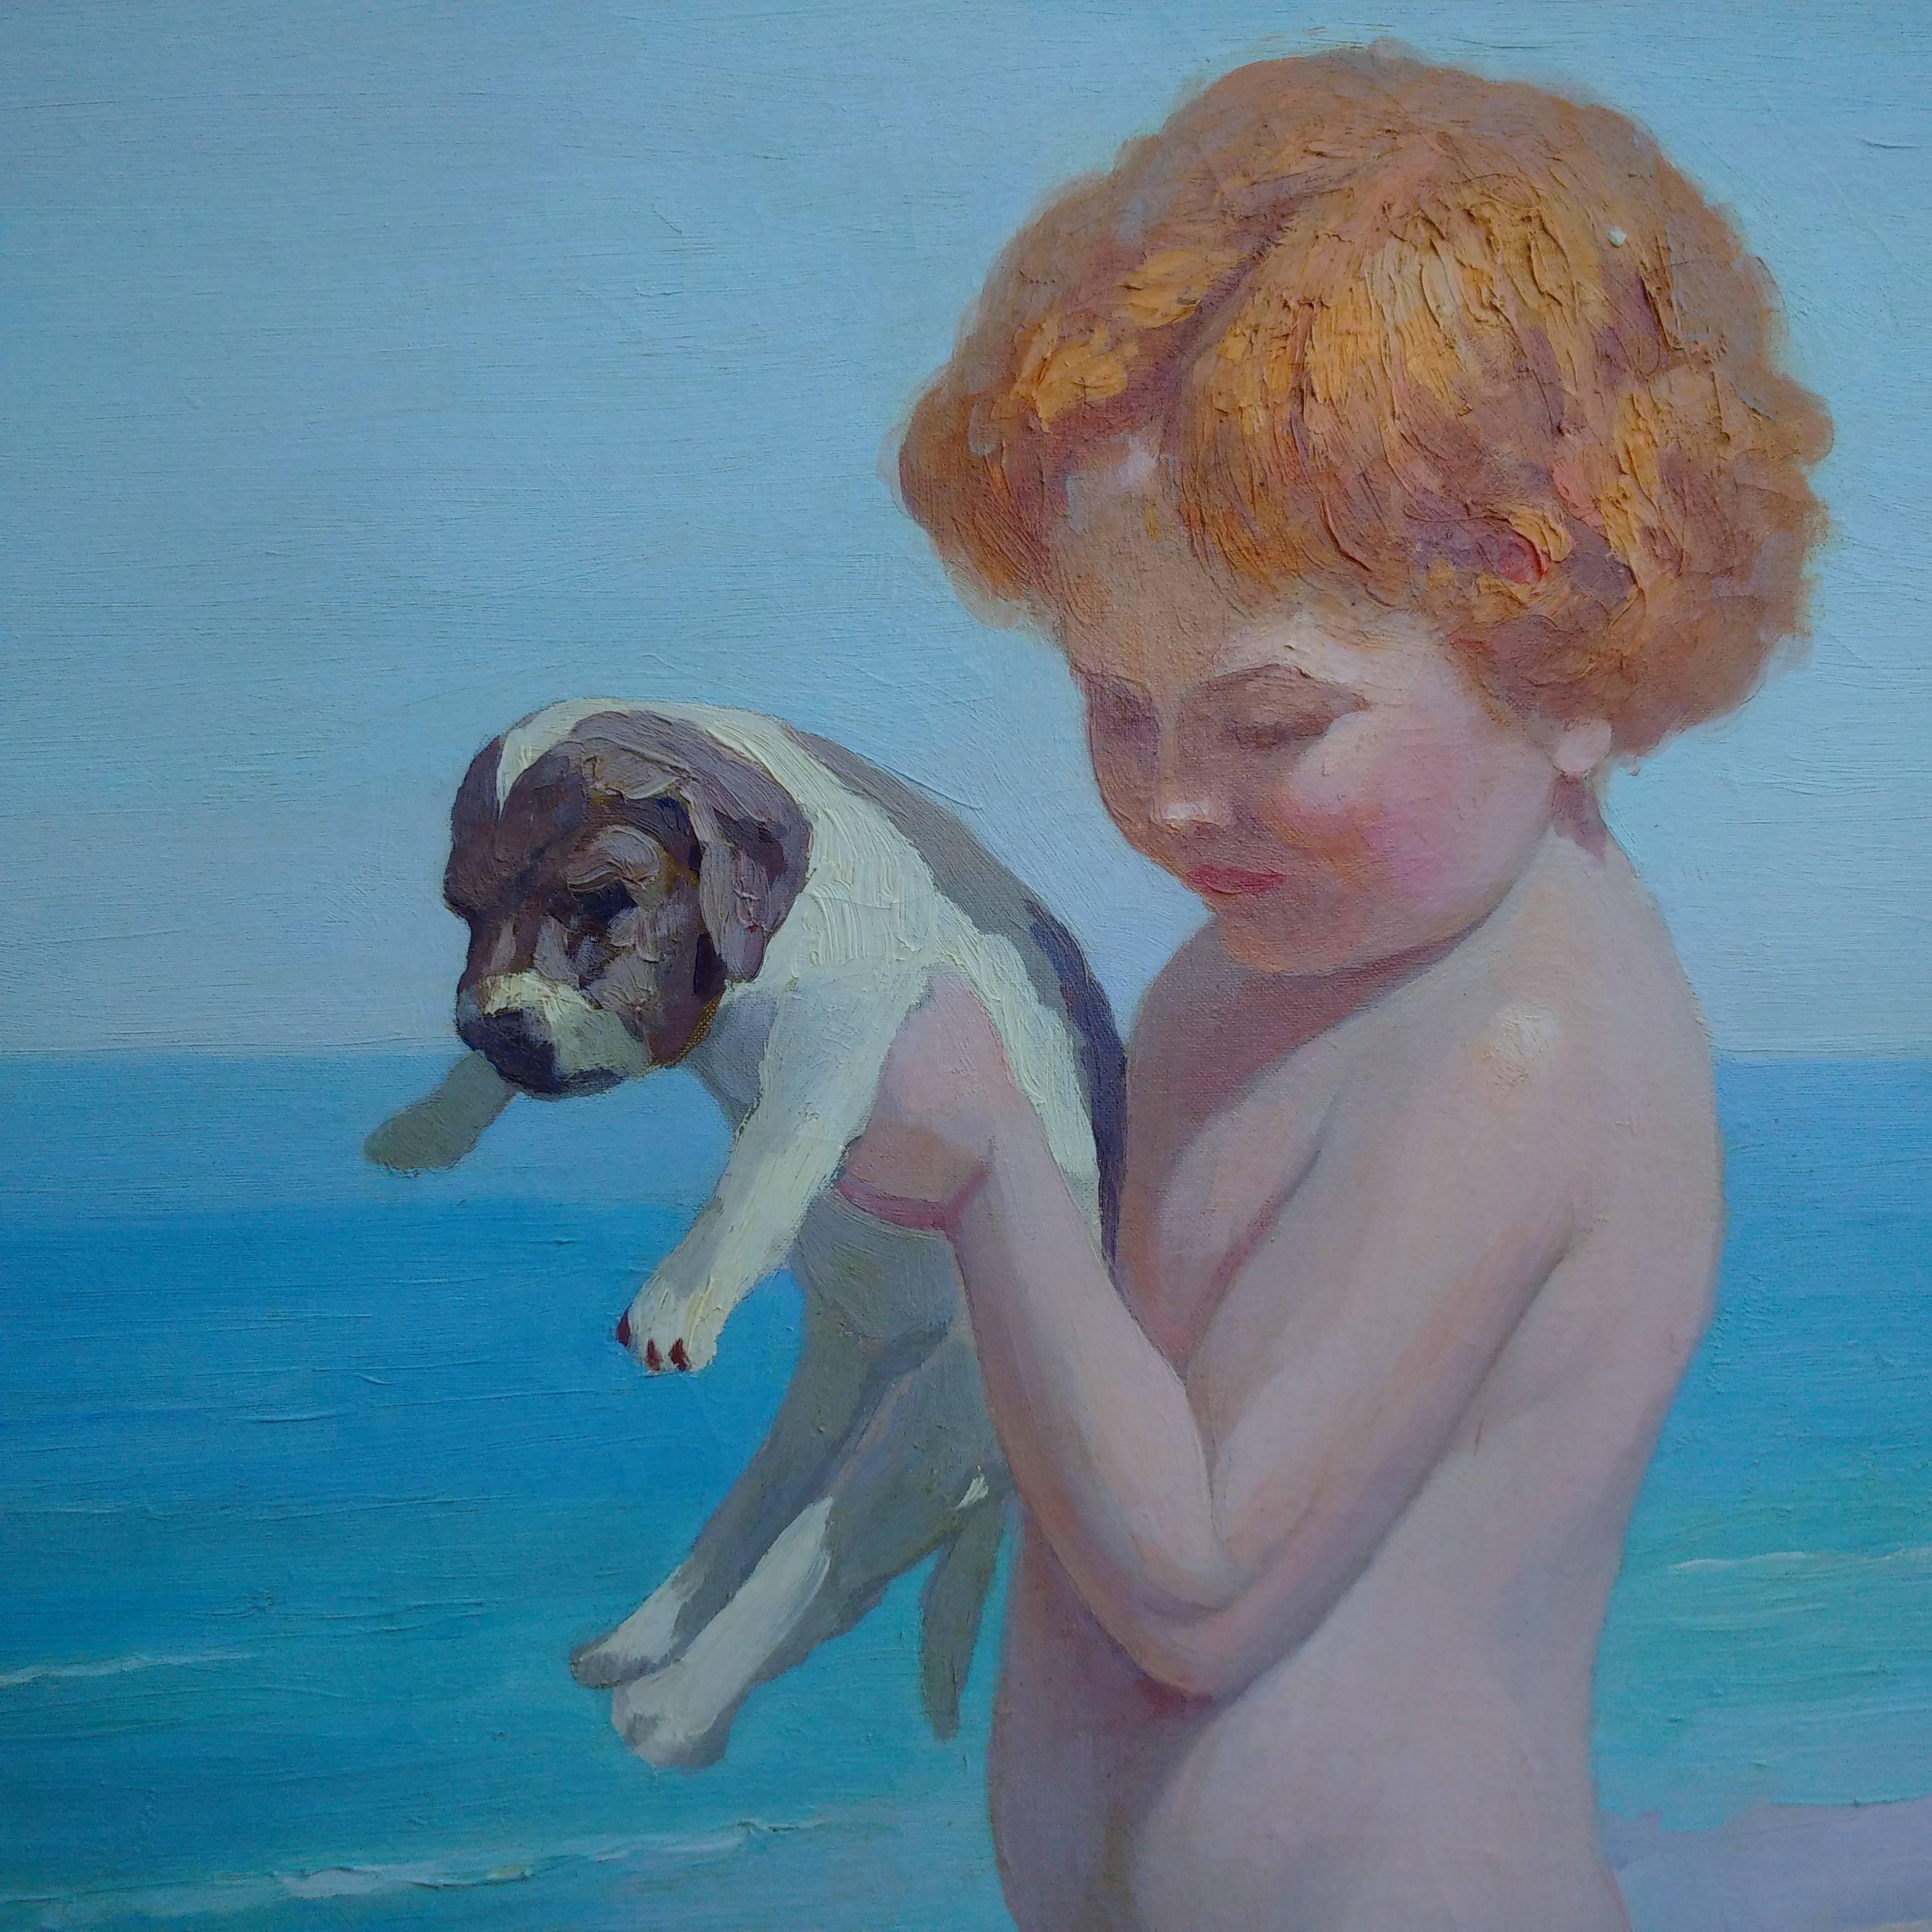 Child and Baby Dogs on the Beach by Nicolas-Saleem Macsoud - Painting by Nicholas Saleem Macsoud